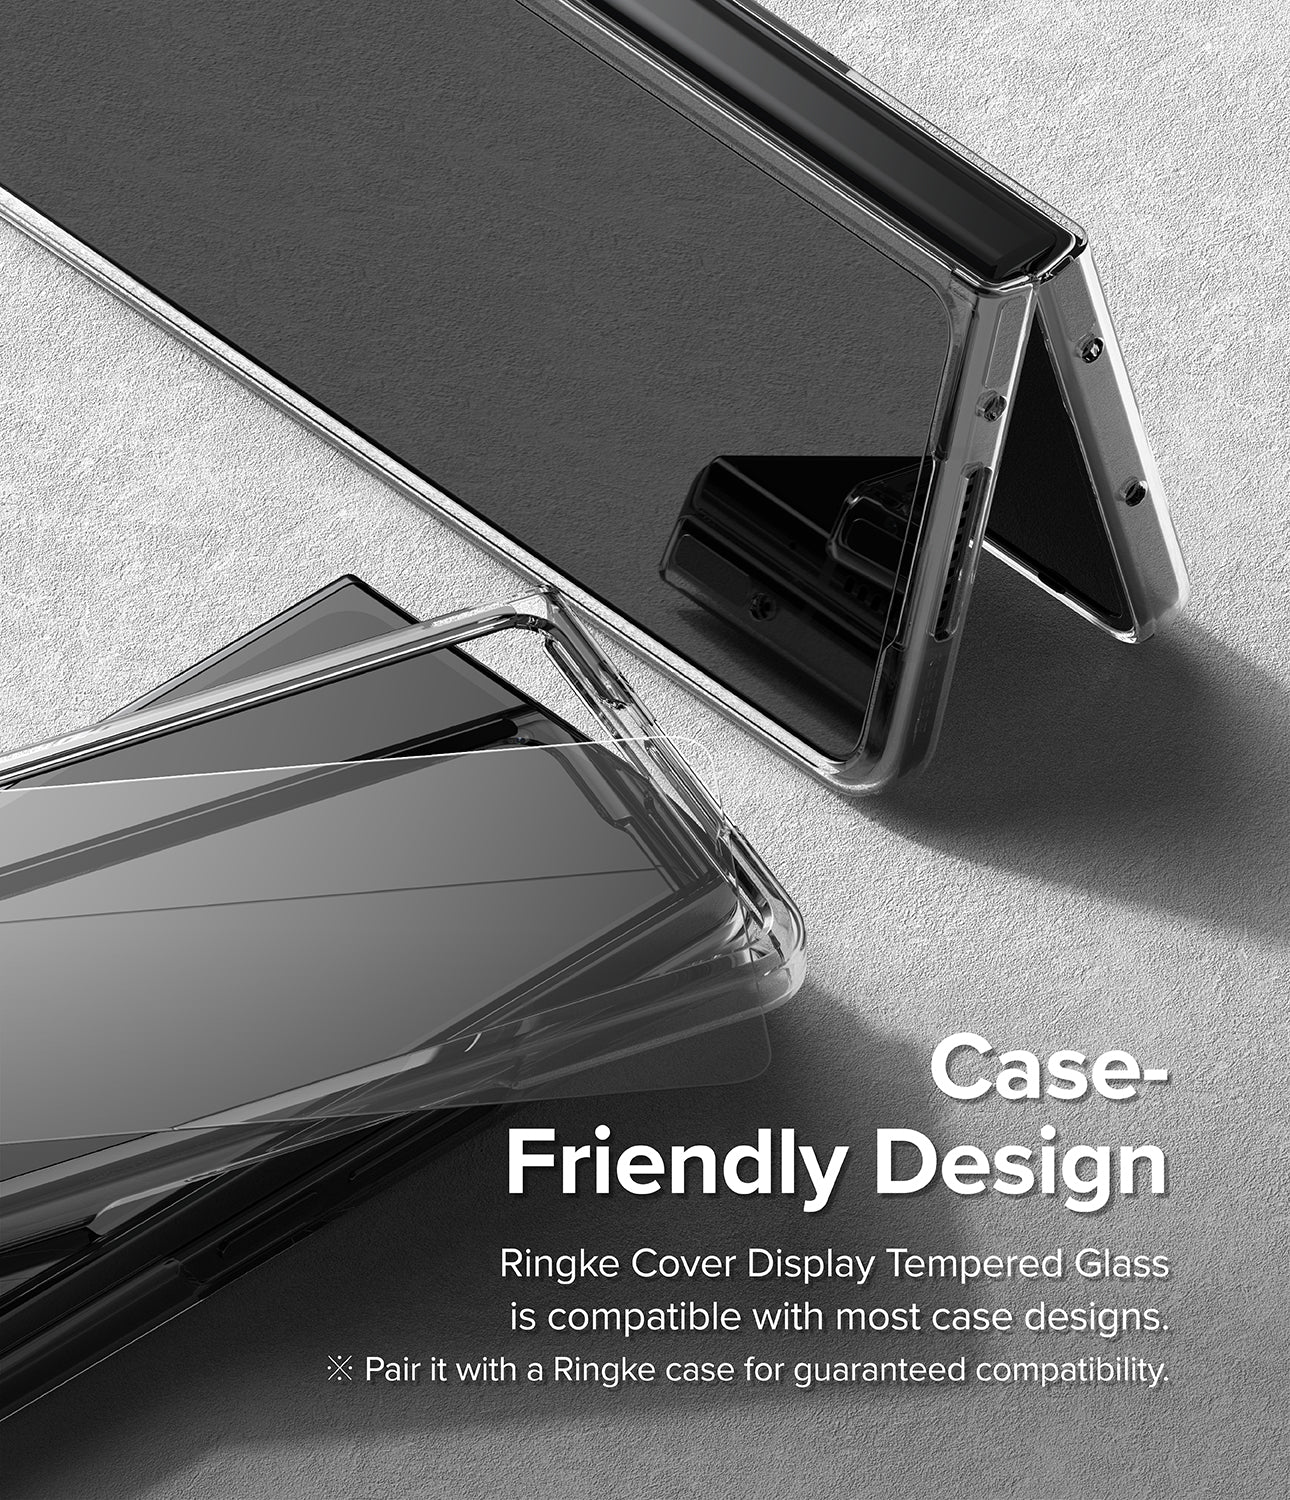 Galaxy Z Fold 4 Combo | Case + Screen Protector + Cover Display Glass